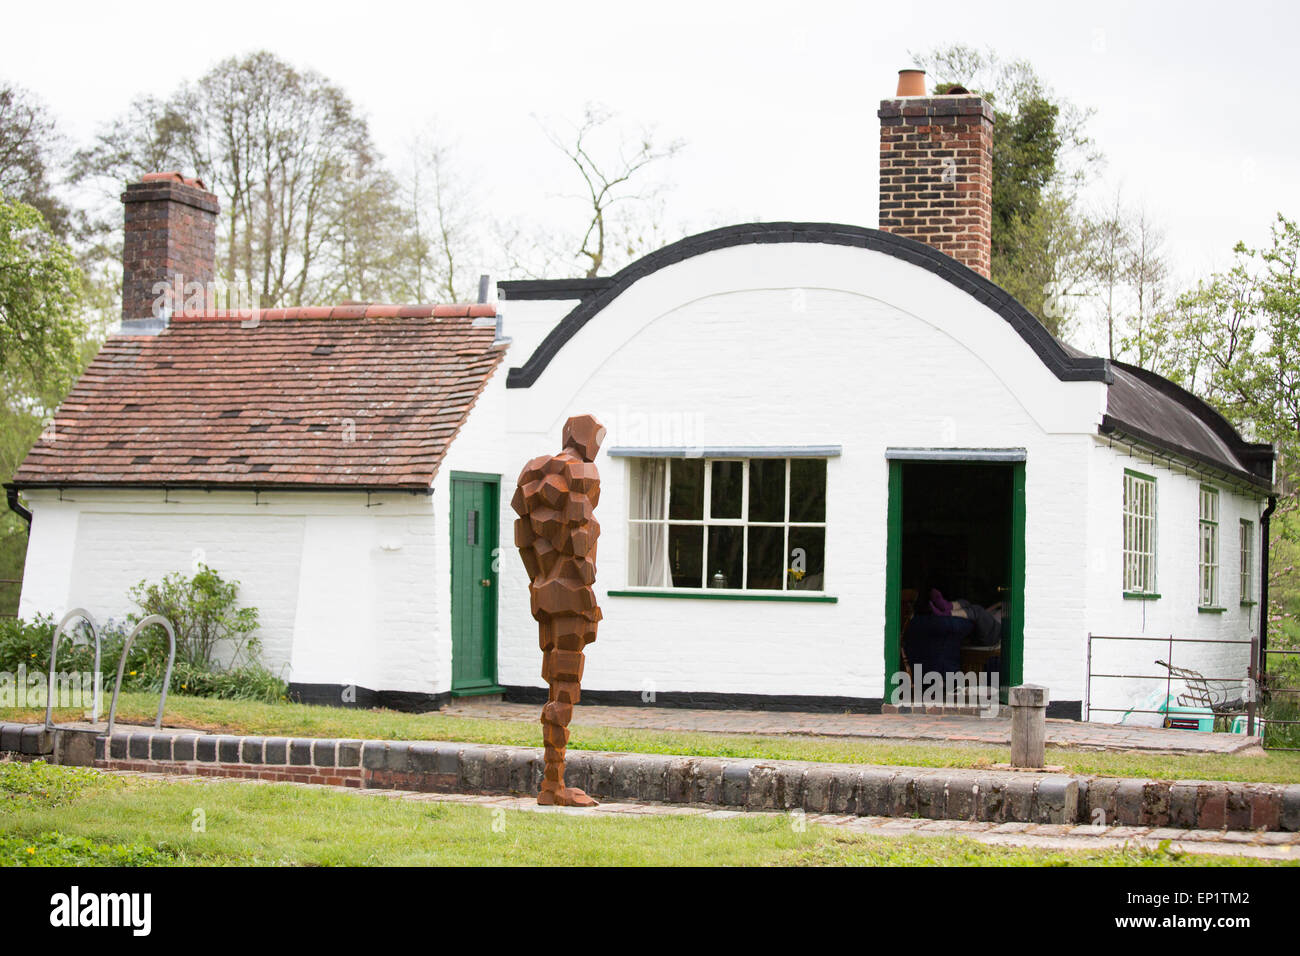 A new sculpture by the artist and sculptor Sir Antony Gormley has been unveiled on a Warwickshire canal in Lowsonford. Stock Photo